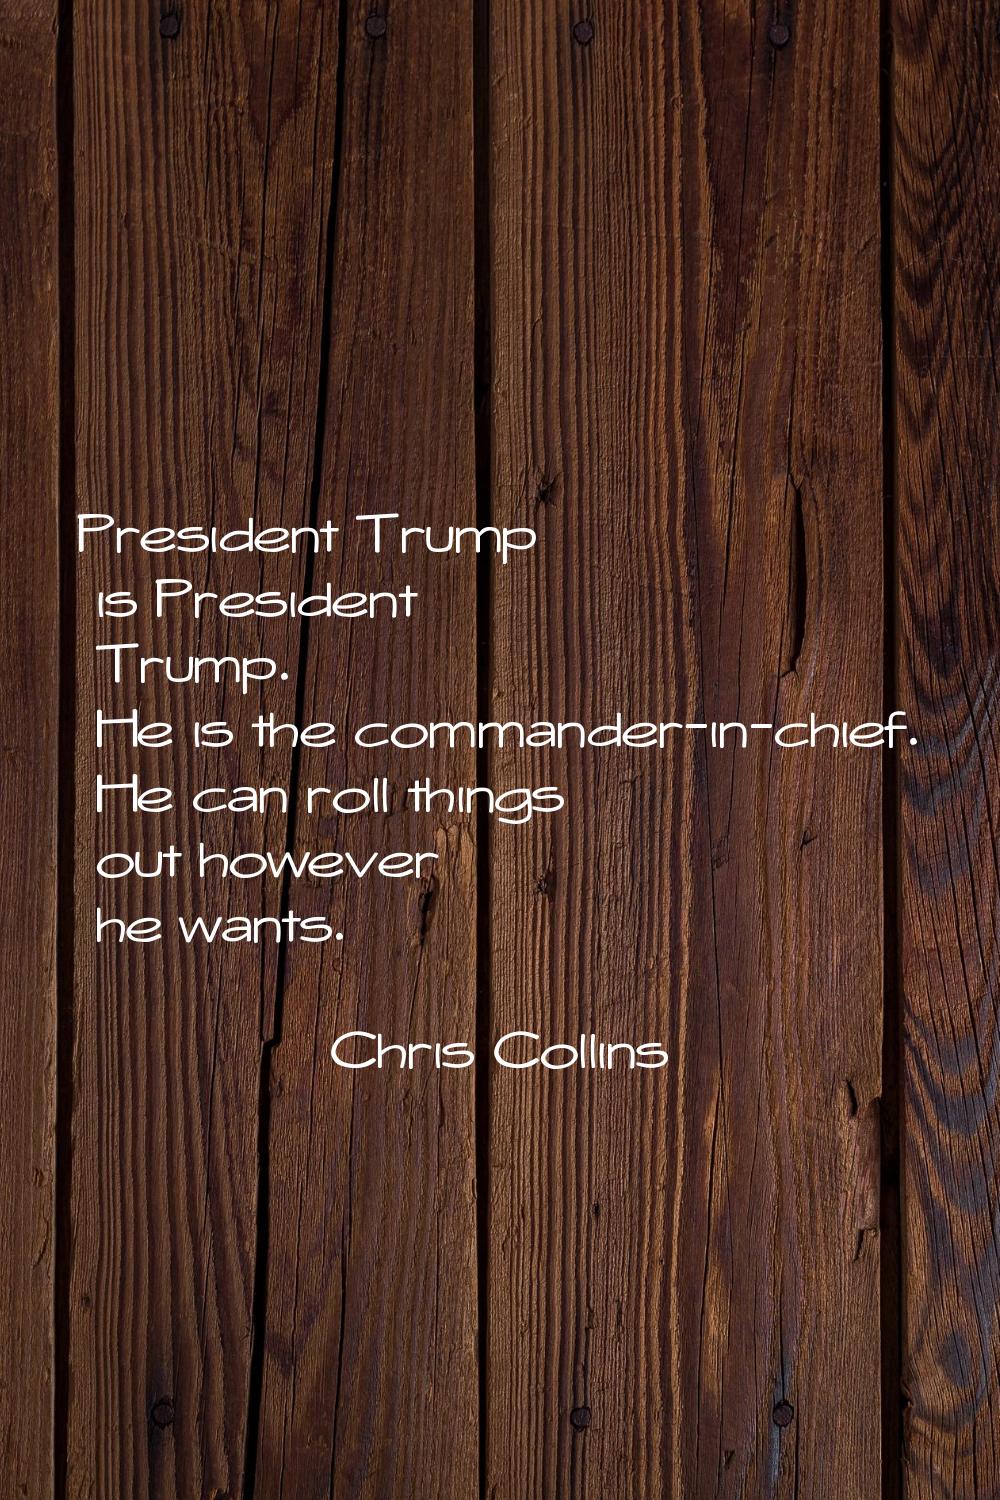 President Trump is President Trump. He is the commander-in-chief. He can roll things out however he